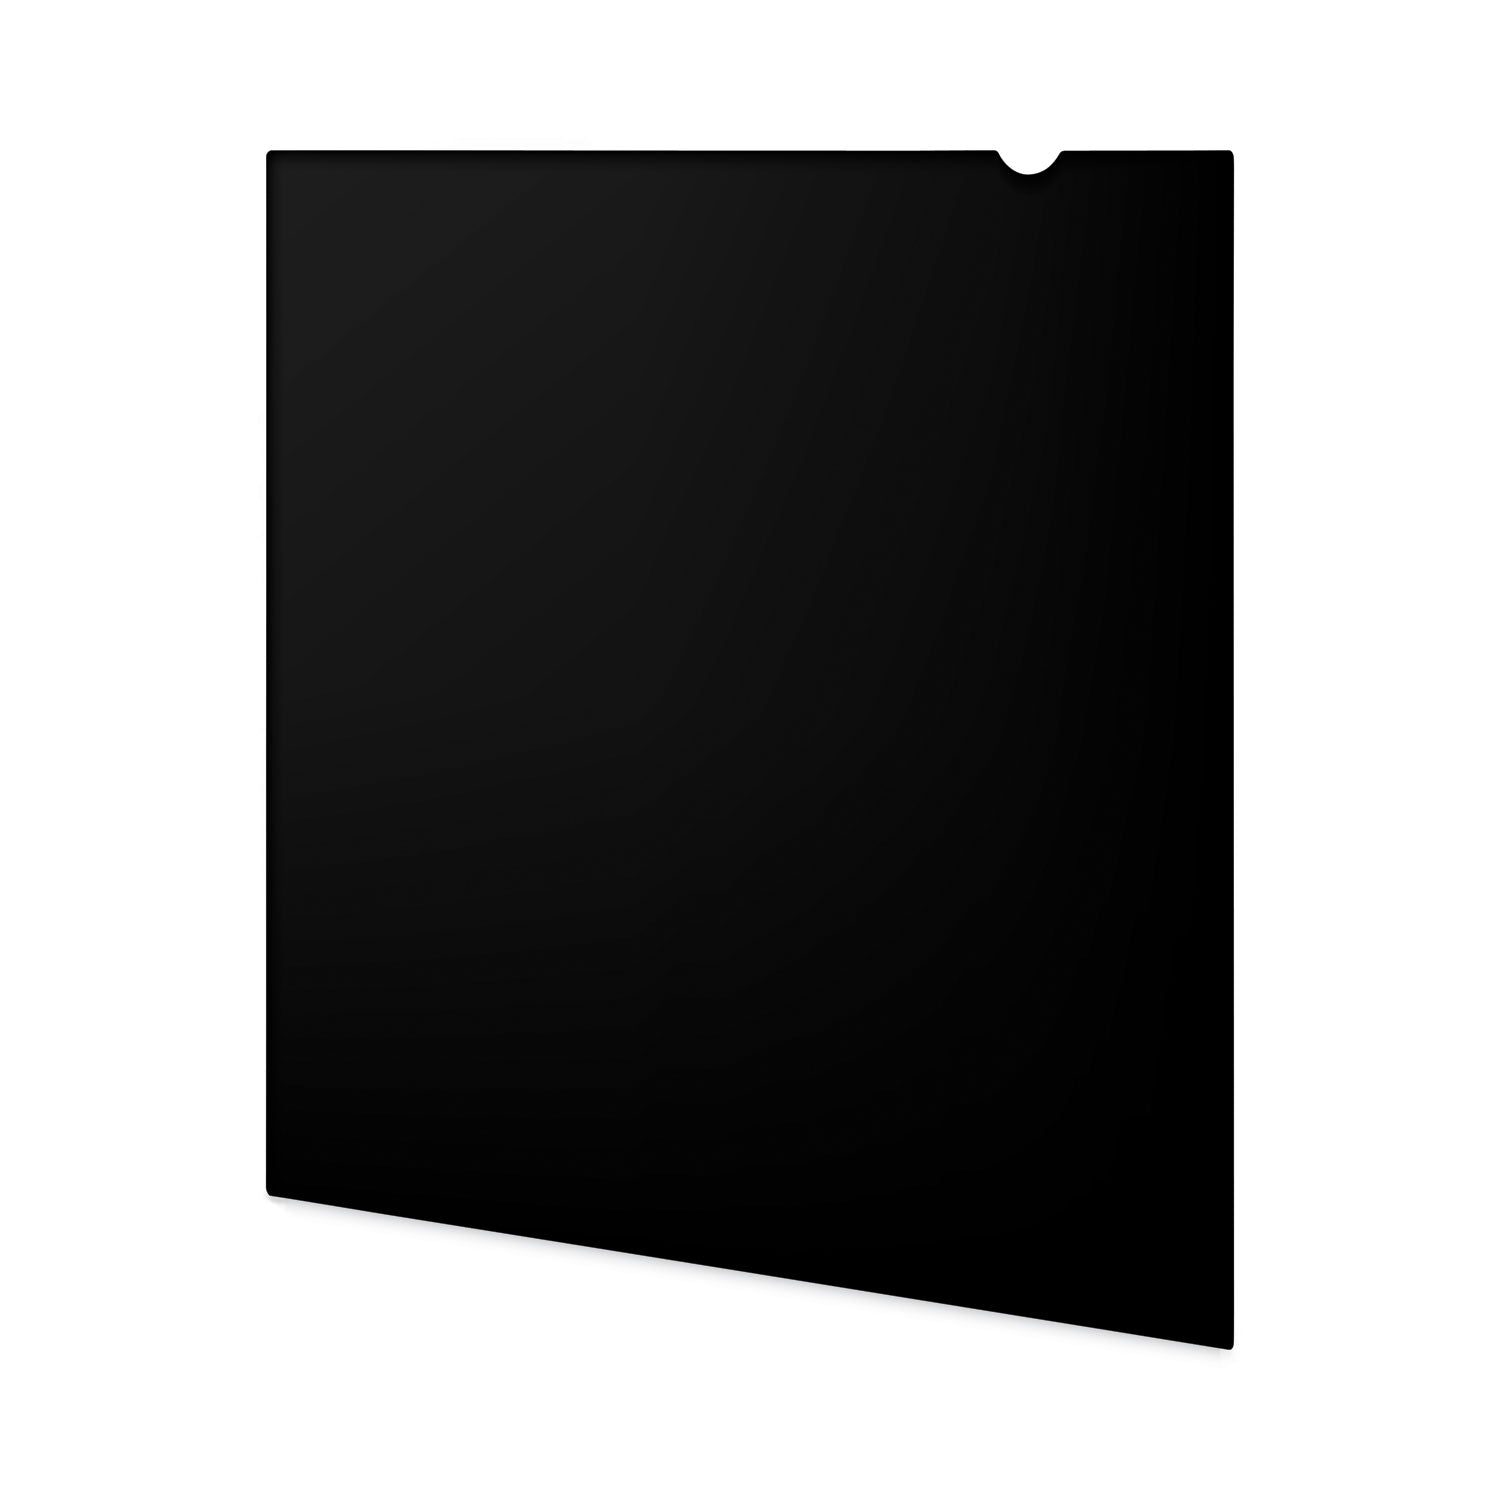 Blackout Privacy Filter for 14" Widescreen Laptop, 16:9 Aspect Ratio - 